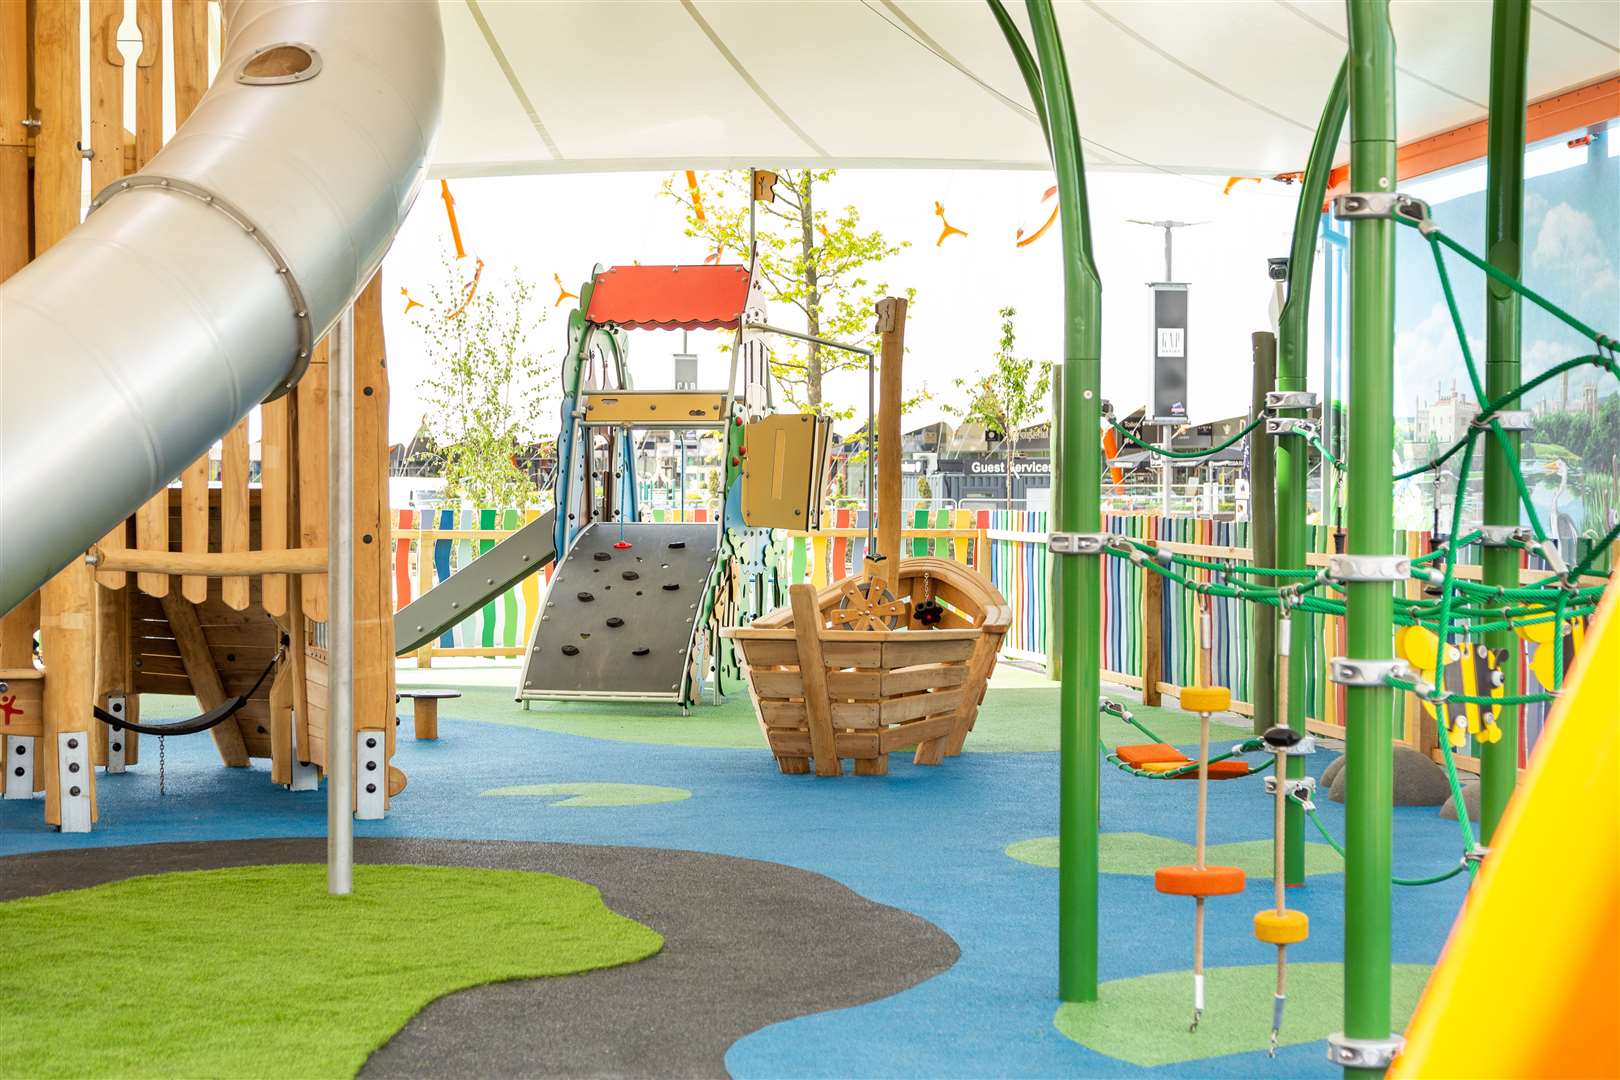 The ‘Garden of England’ themed play area delivers the ultimate play experience